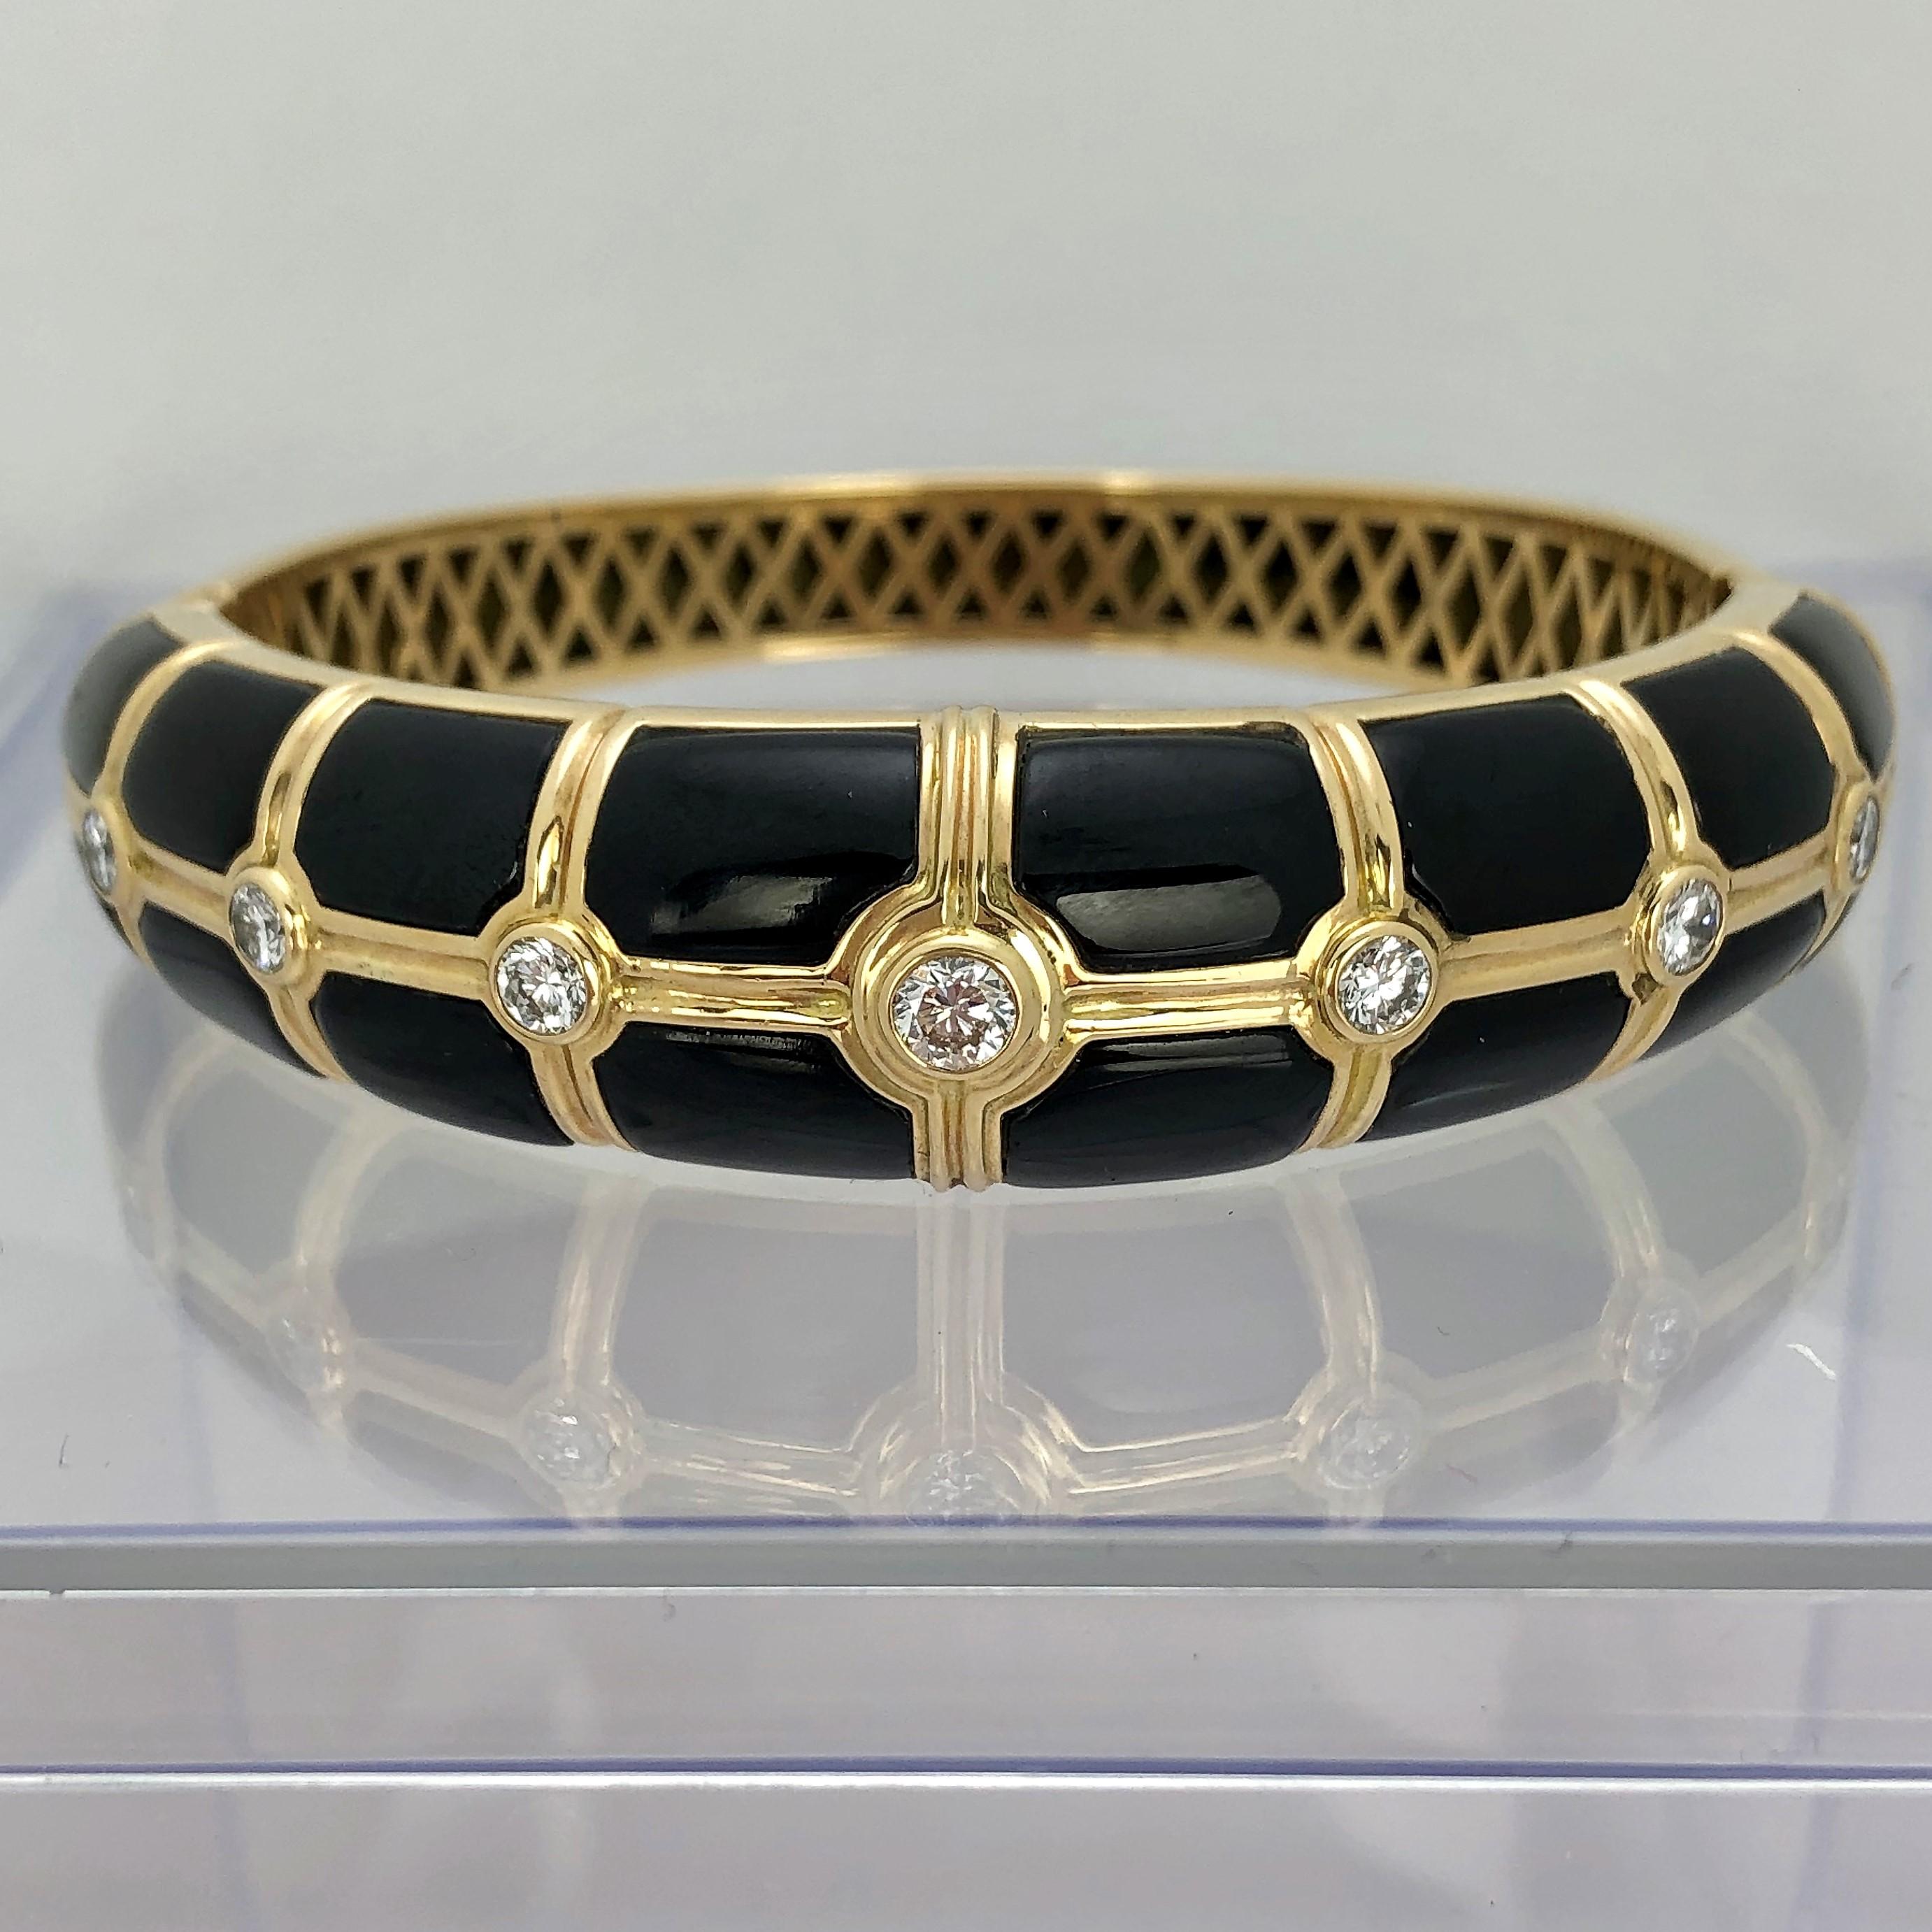 Beautifully crafted in 14K Yellow Gold with sixteen onyx inlays and set with seven round brilliant 
cut diamonds, this tailored, easy to wear bangle is ideal for every day use. The entire inside of
the bangle is finished off with a high quality,